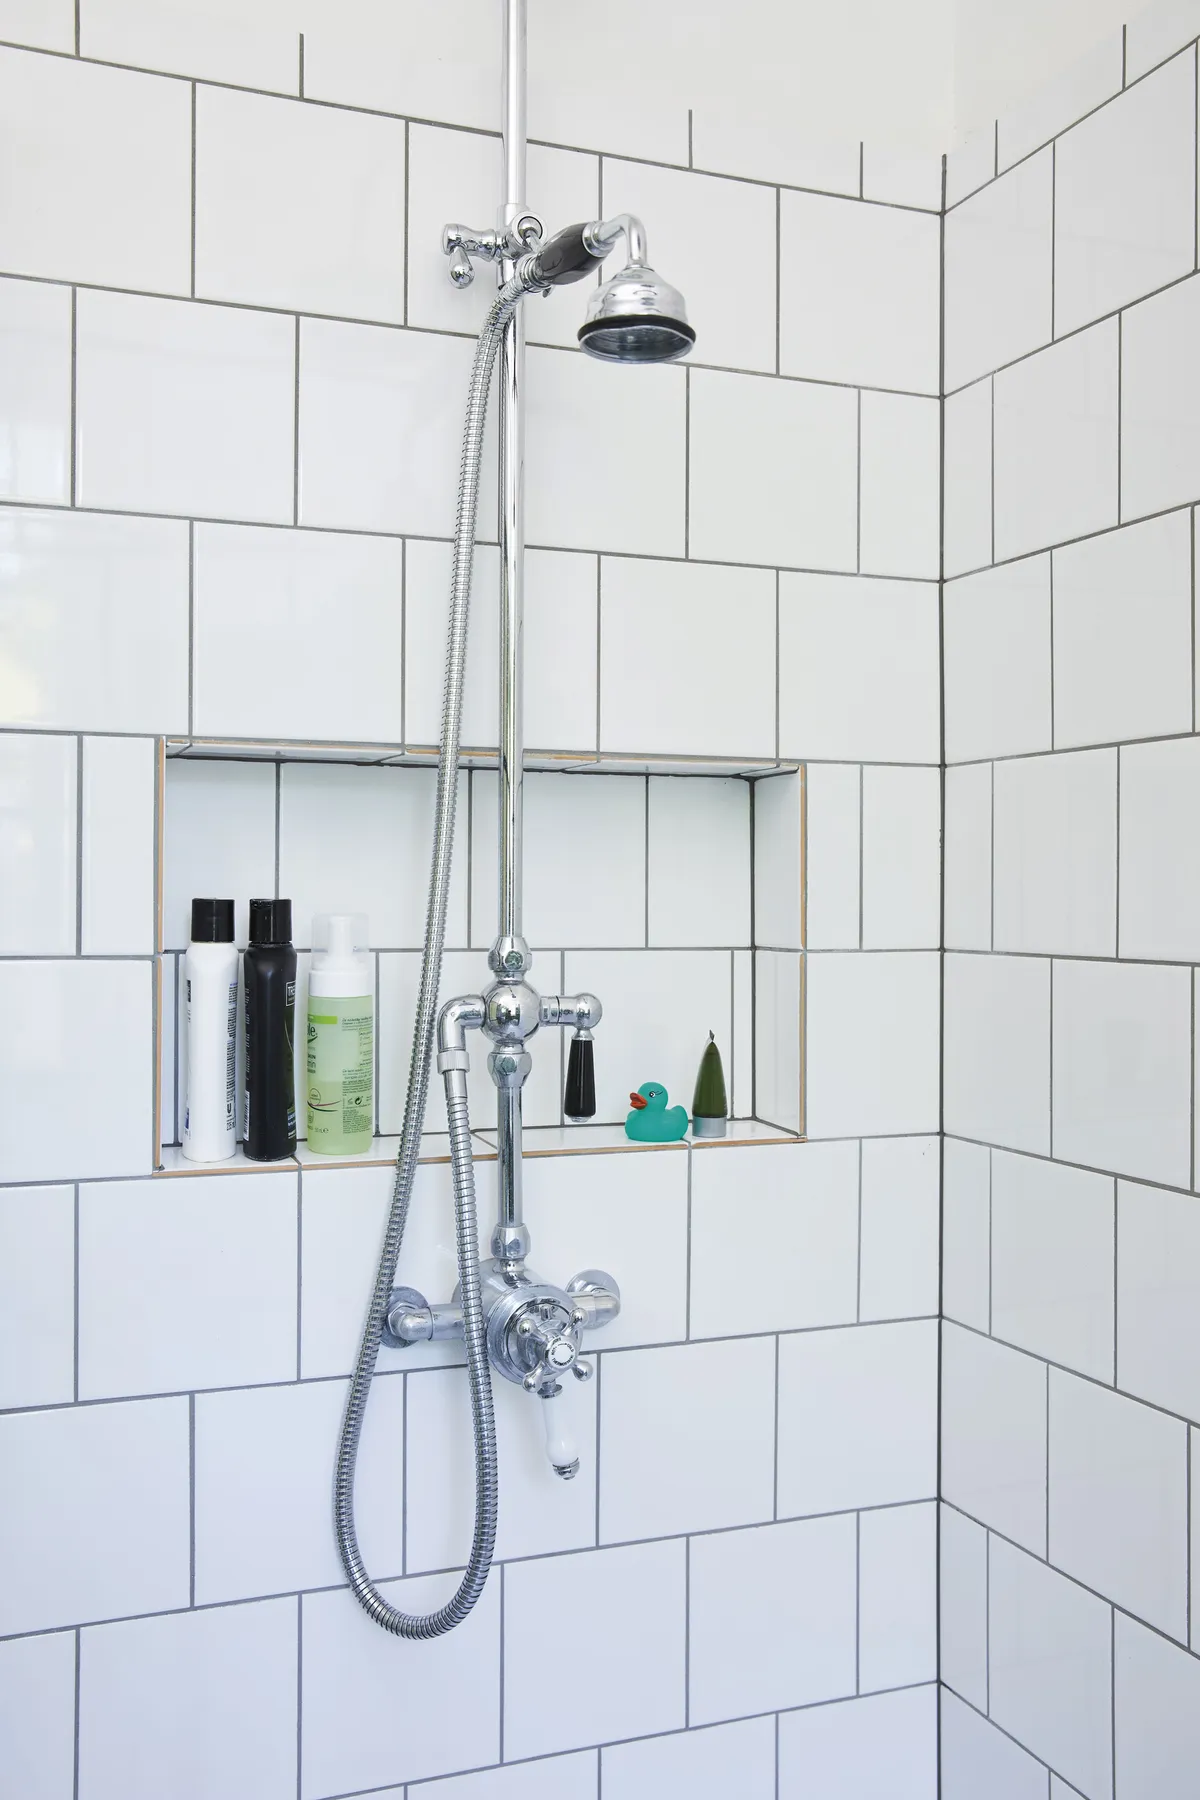 By simply opening up a section of existing stud wall, the couple were able to create a handy recessed storage shelf – perfect for all those showering essentials